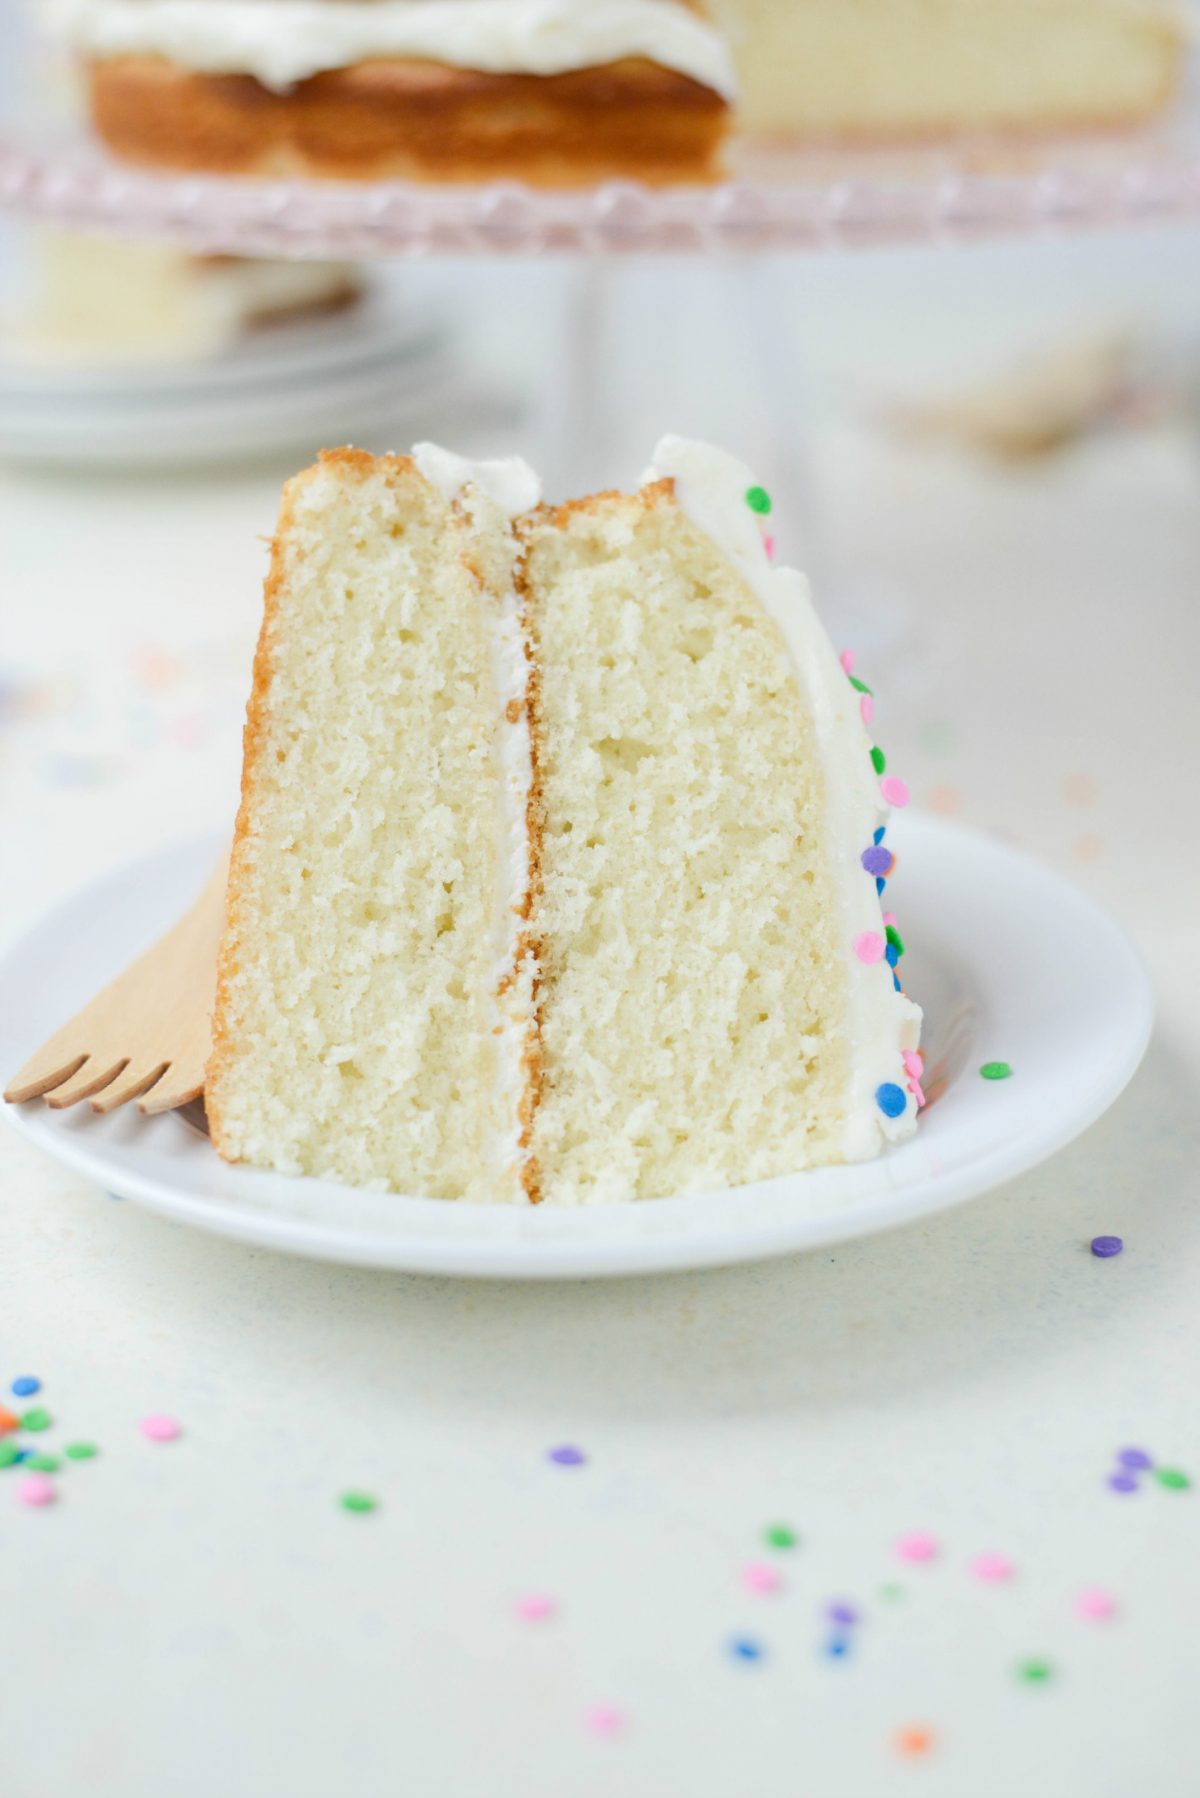 Vanilla Cake with Vanilla Buttercream Frosting Recipe: How to Make It